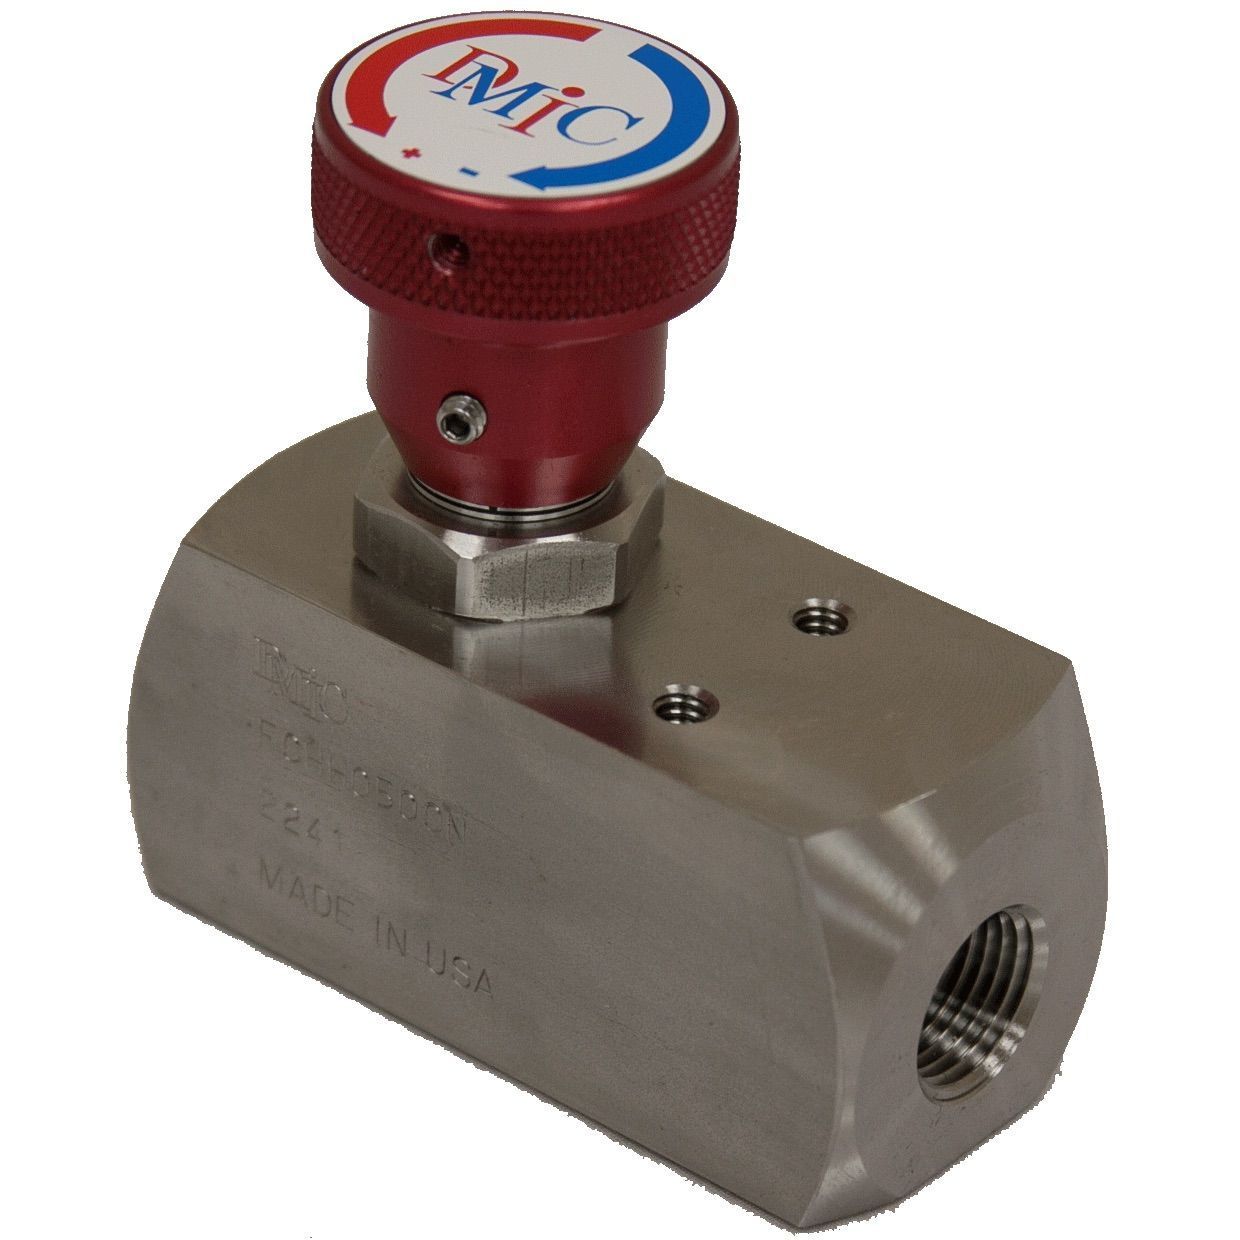 FCHH-1500N-1141 : DMIC Flow Control, Unidirectional, with Integrated Check, 1.5" NPT, Carbon Steel, 10000psi